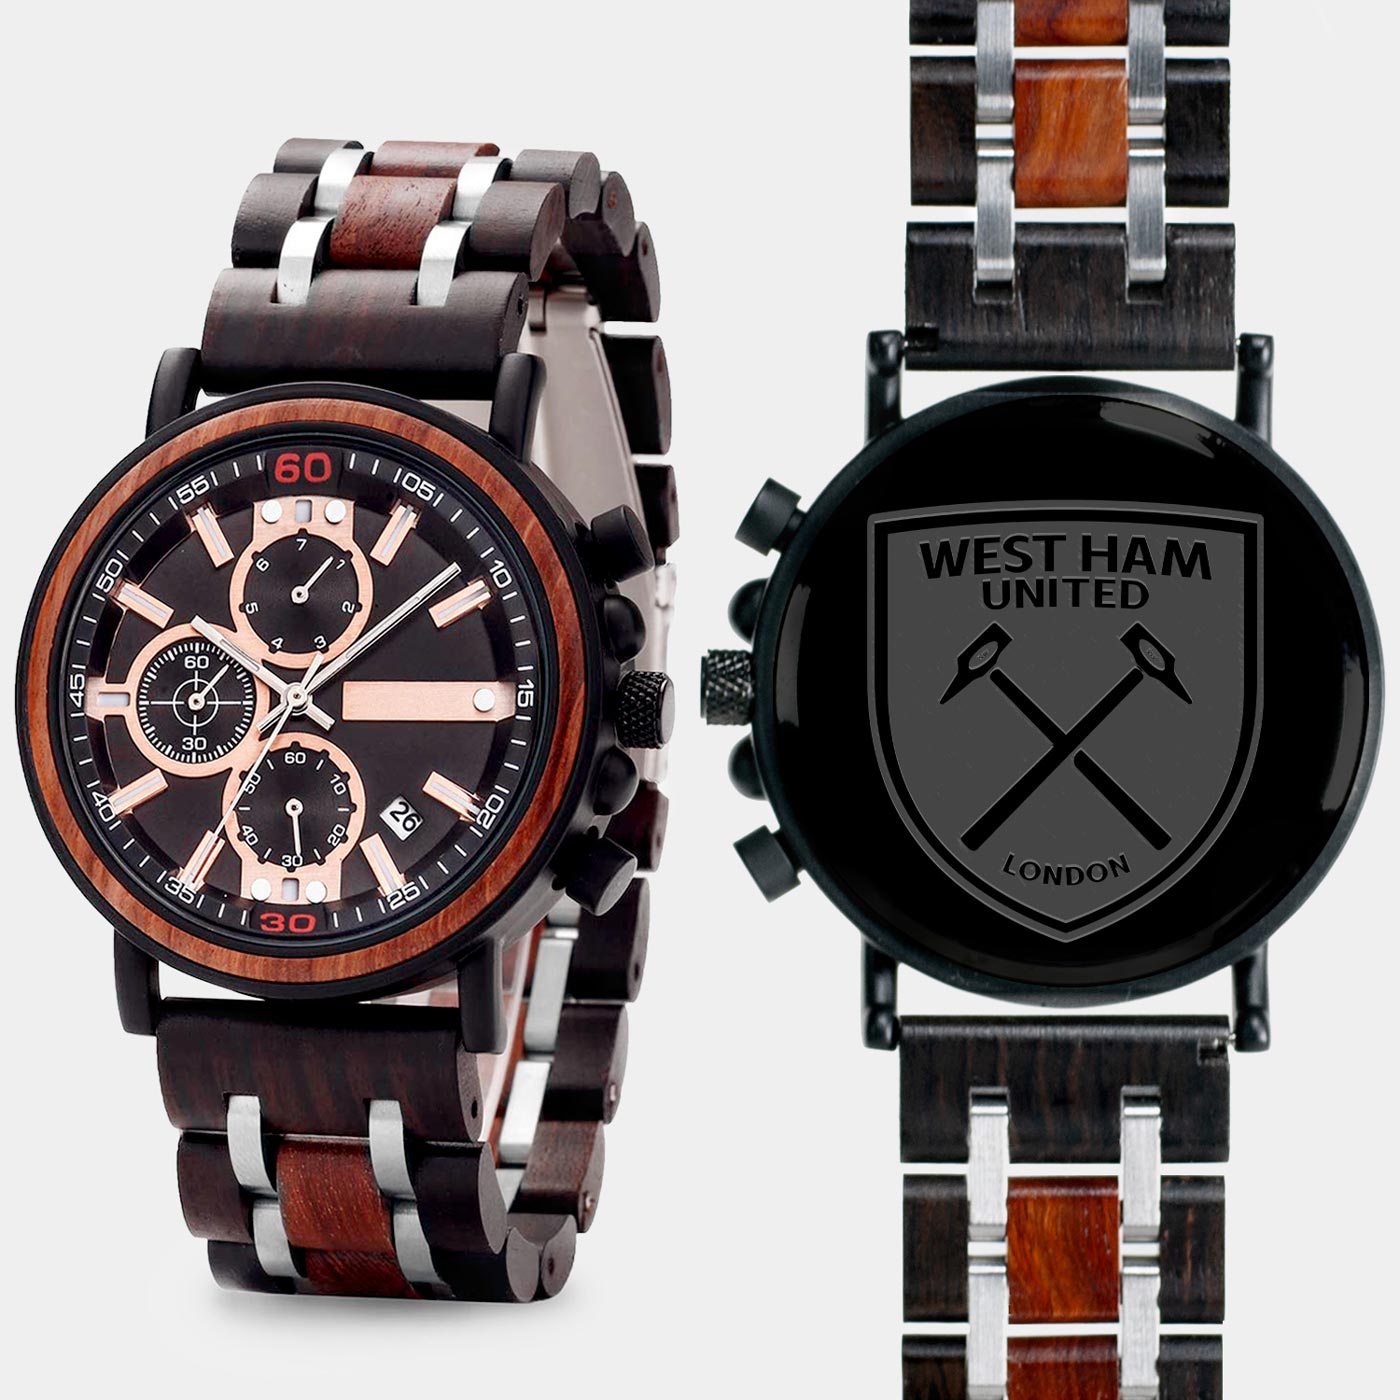 West Ham United F.C. Mens Wrist Watch  - Personalized West Ham United F.C. Mens Watches - Custom Gifts For Him, Birthday Gifts, Gift For Dad - Best 2022 West Ham United F.C. Christmas Gifts - Black 45mm FC Wood Watch